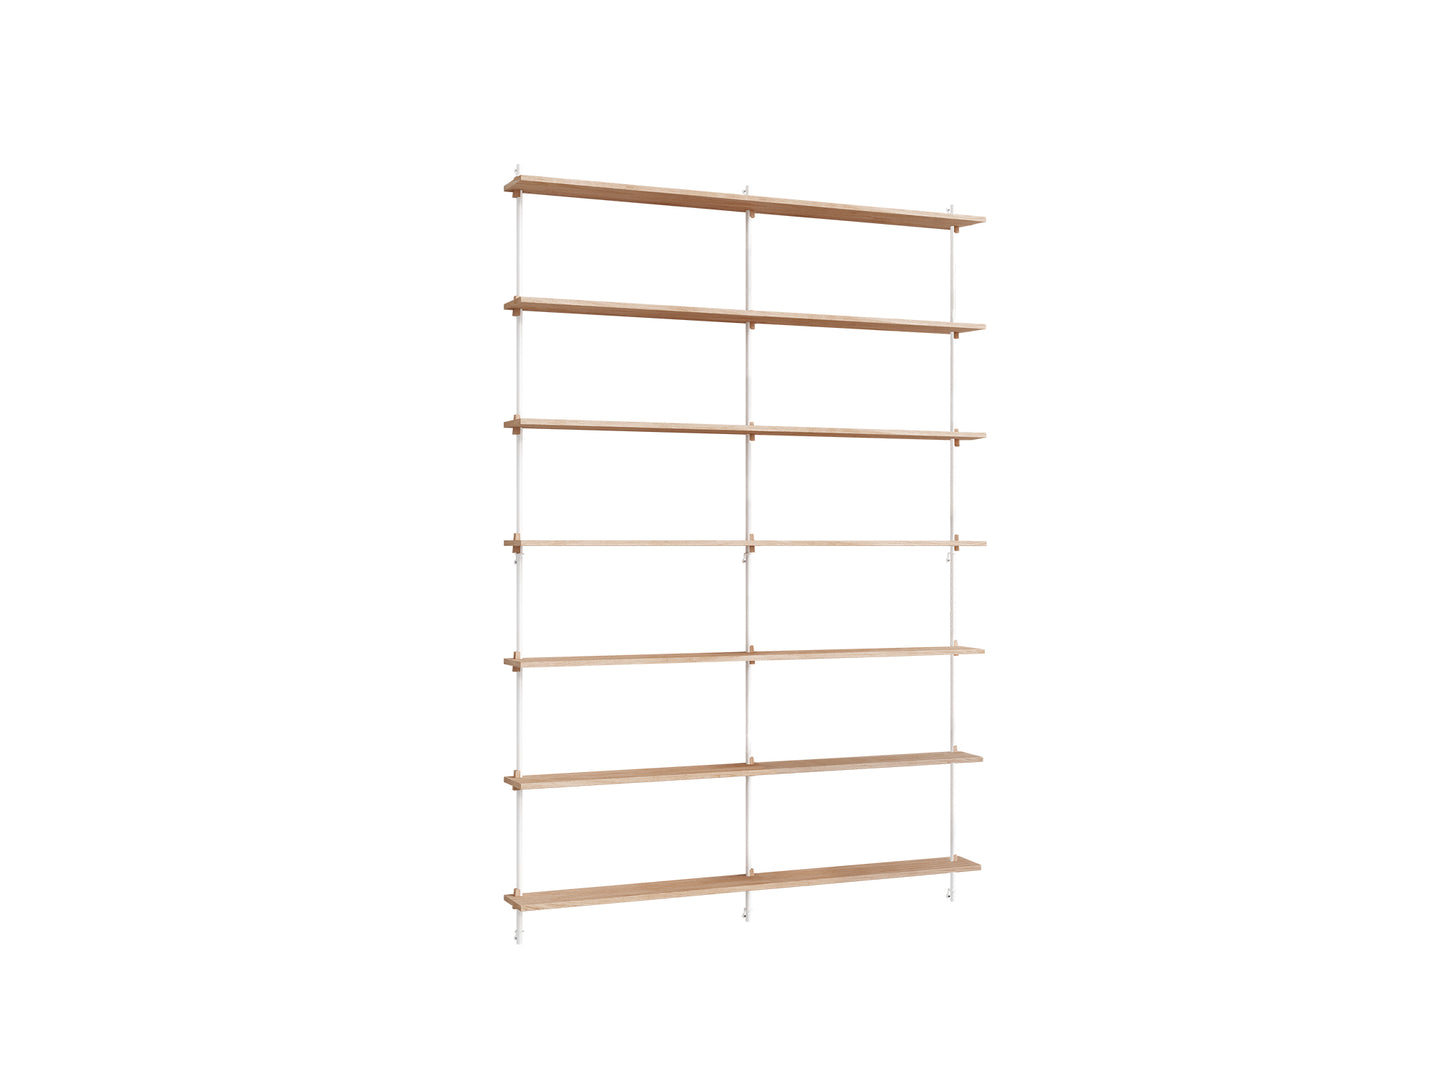 Wall Shelving System Sets (230 cm) by Moebe - WS.230.2.B / White Uprights / Oiled Oak